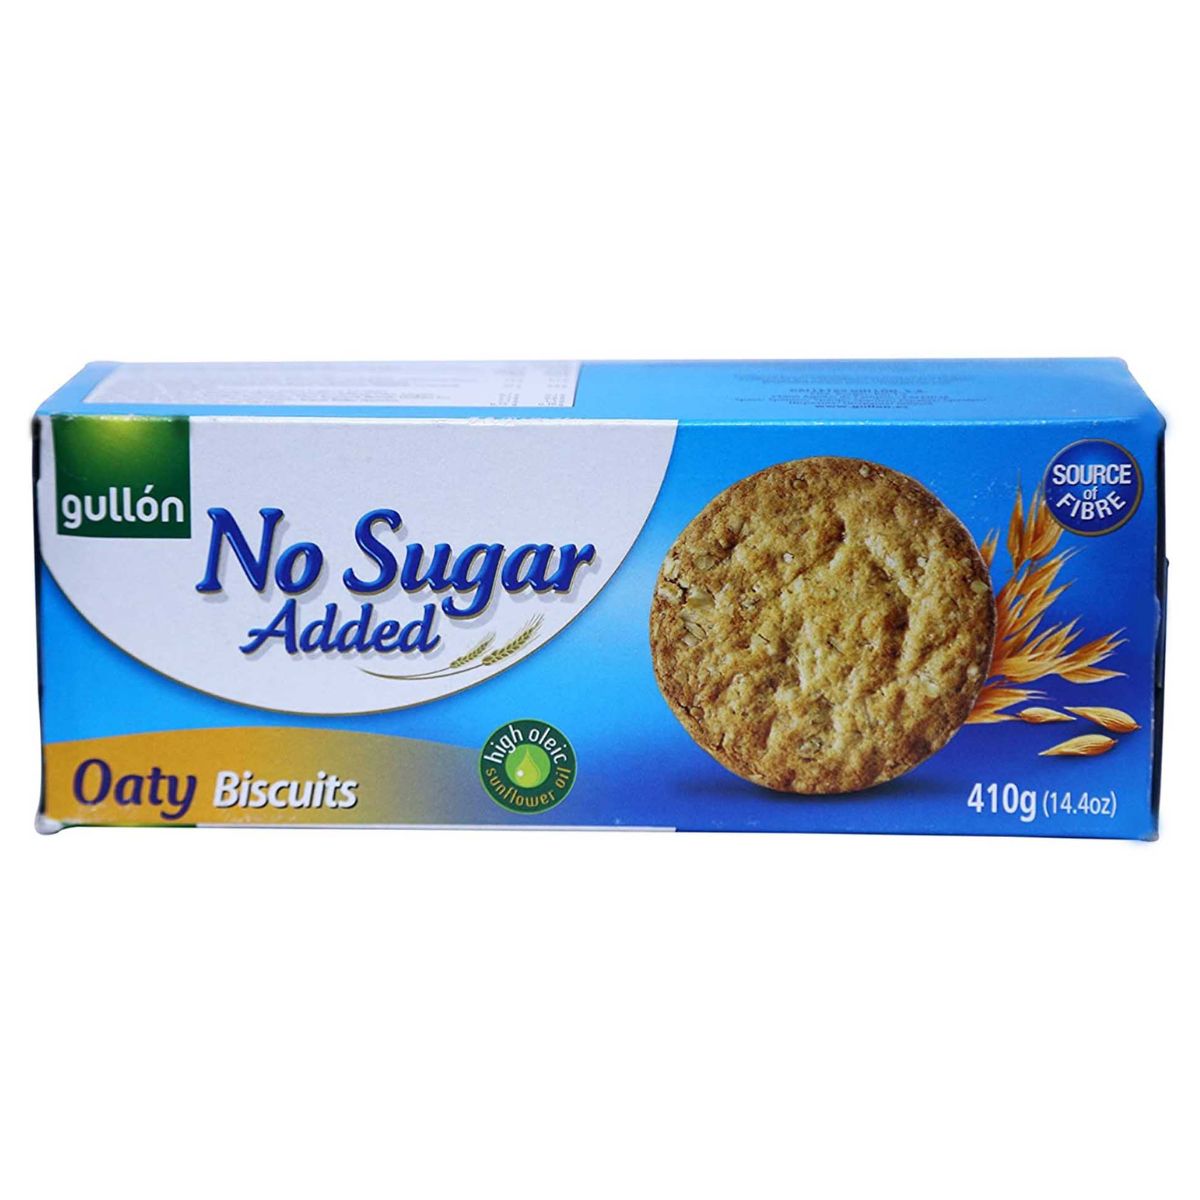 A box of Gullon - Sugar Free Oaty Biscuits - 410g.